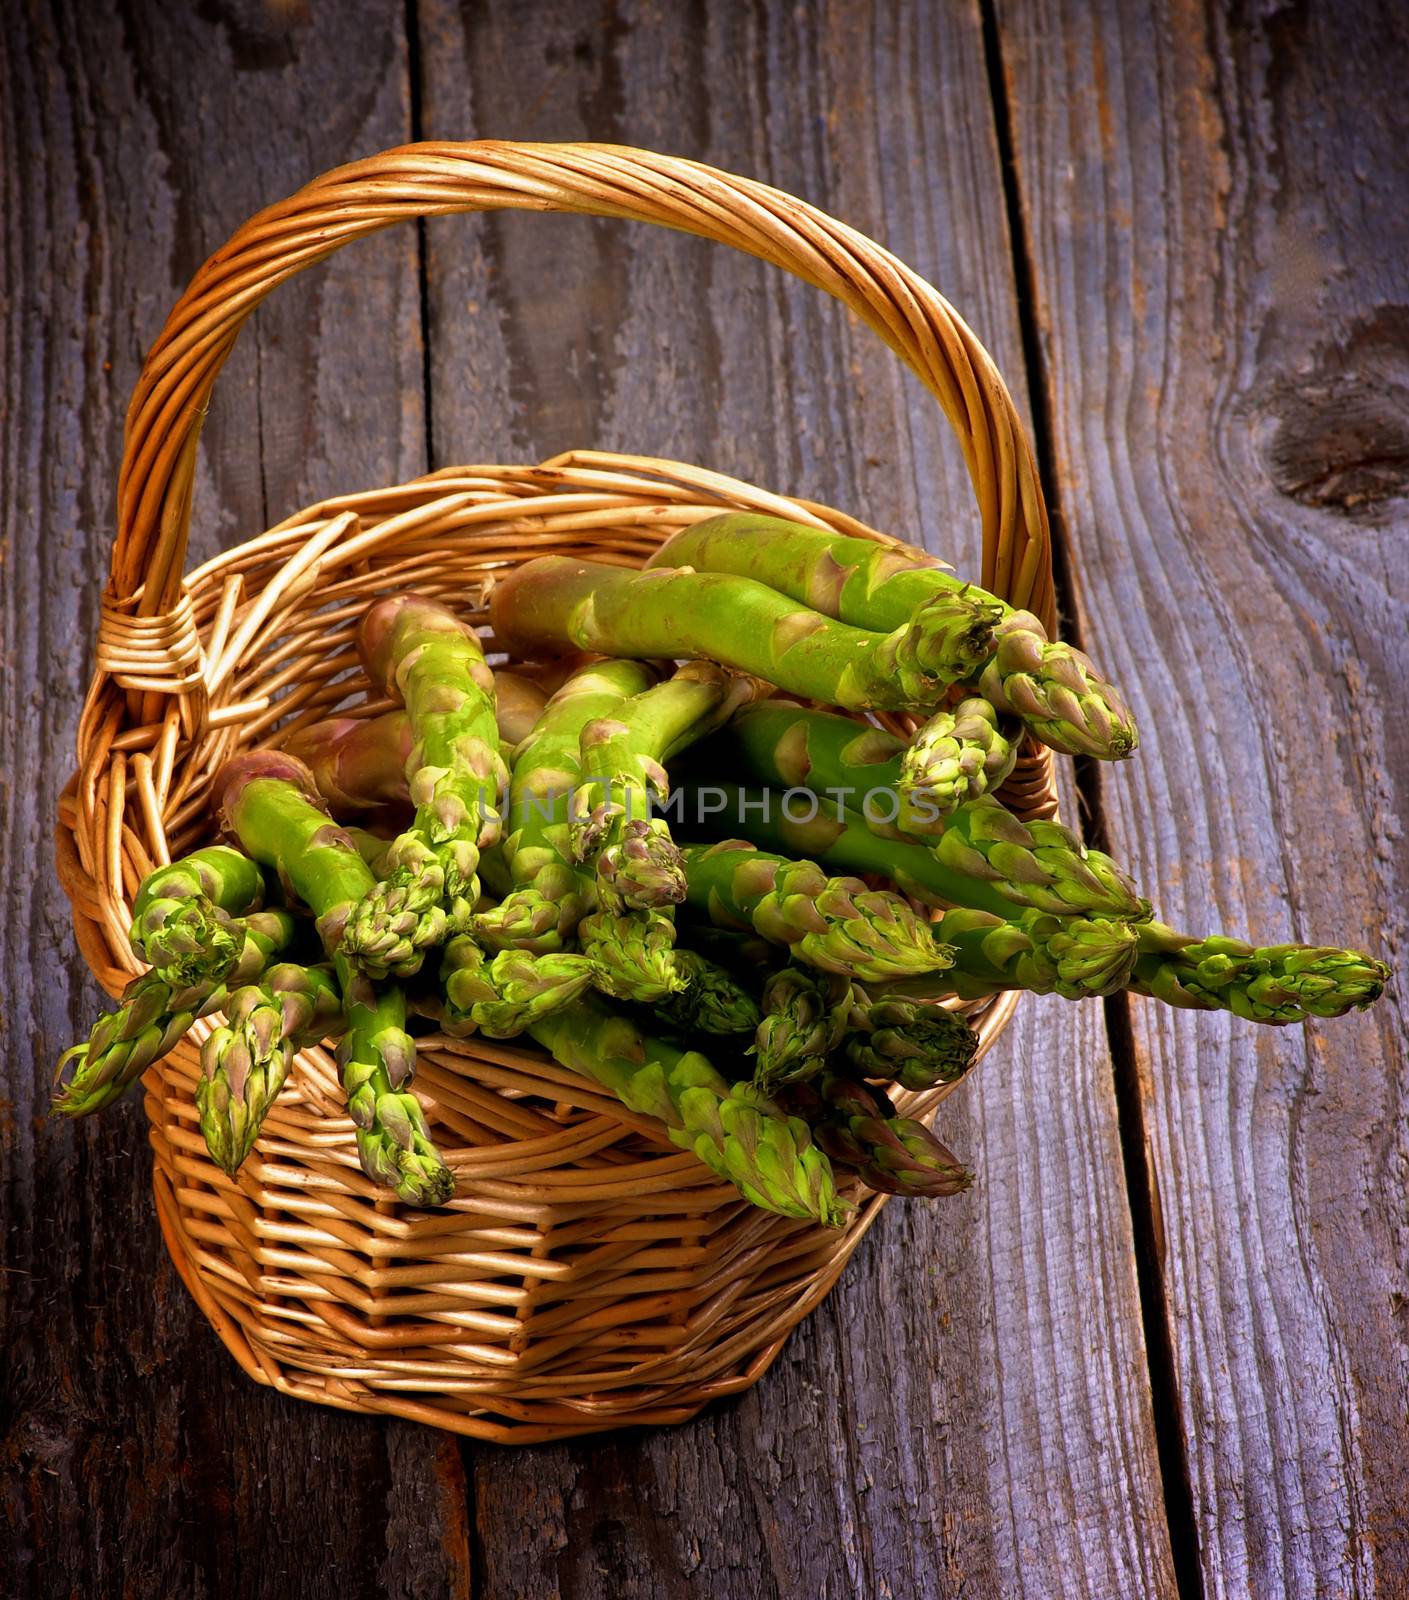 Asparagus Sprouts in Wicker Basket isolated on Rustic Wooden background